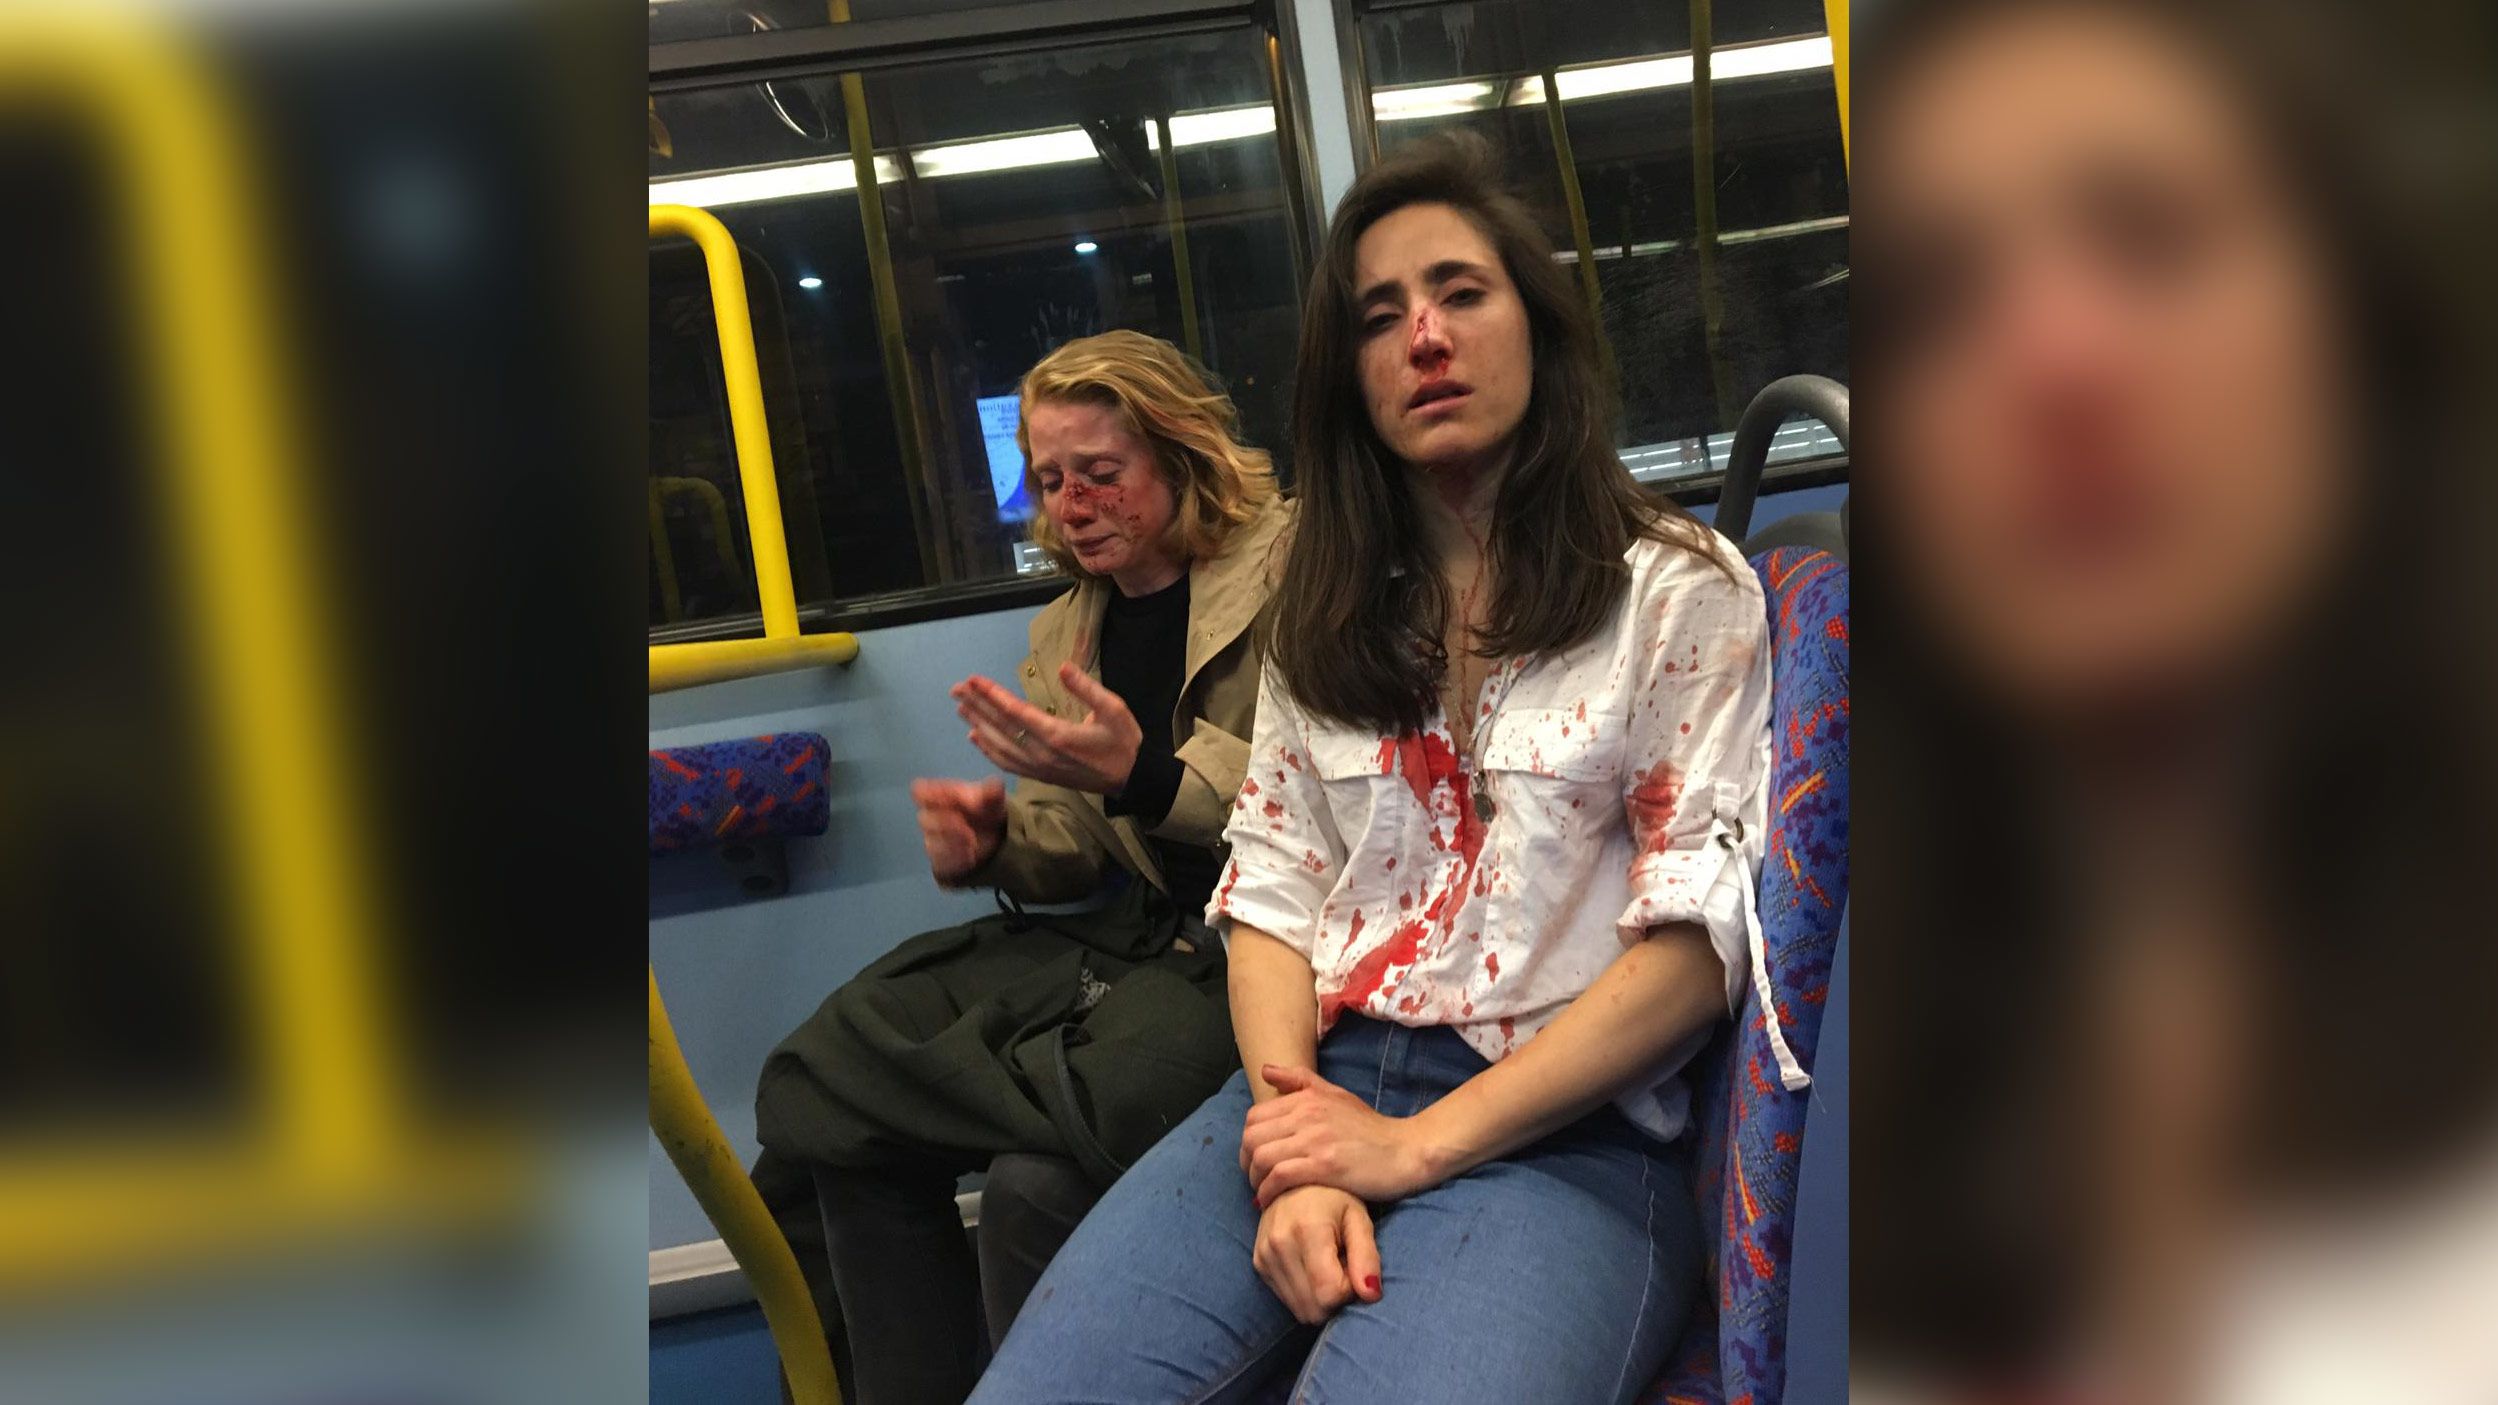 Bus Force Xxx - London bus attack: Lesbian couple viciously beaten in homophobic incident |  CNN